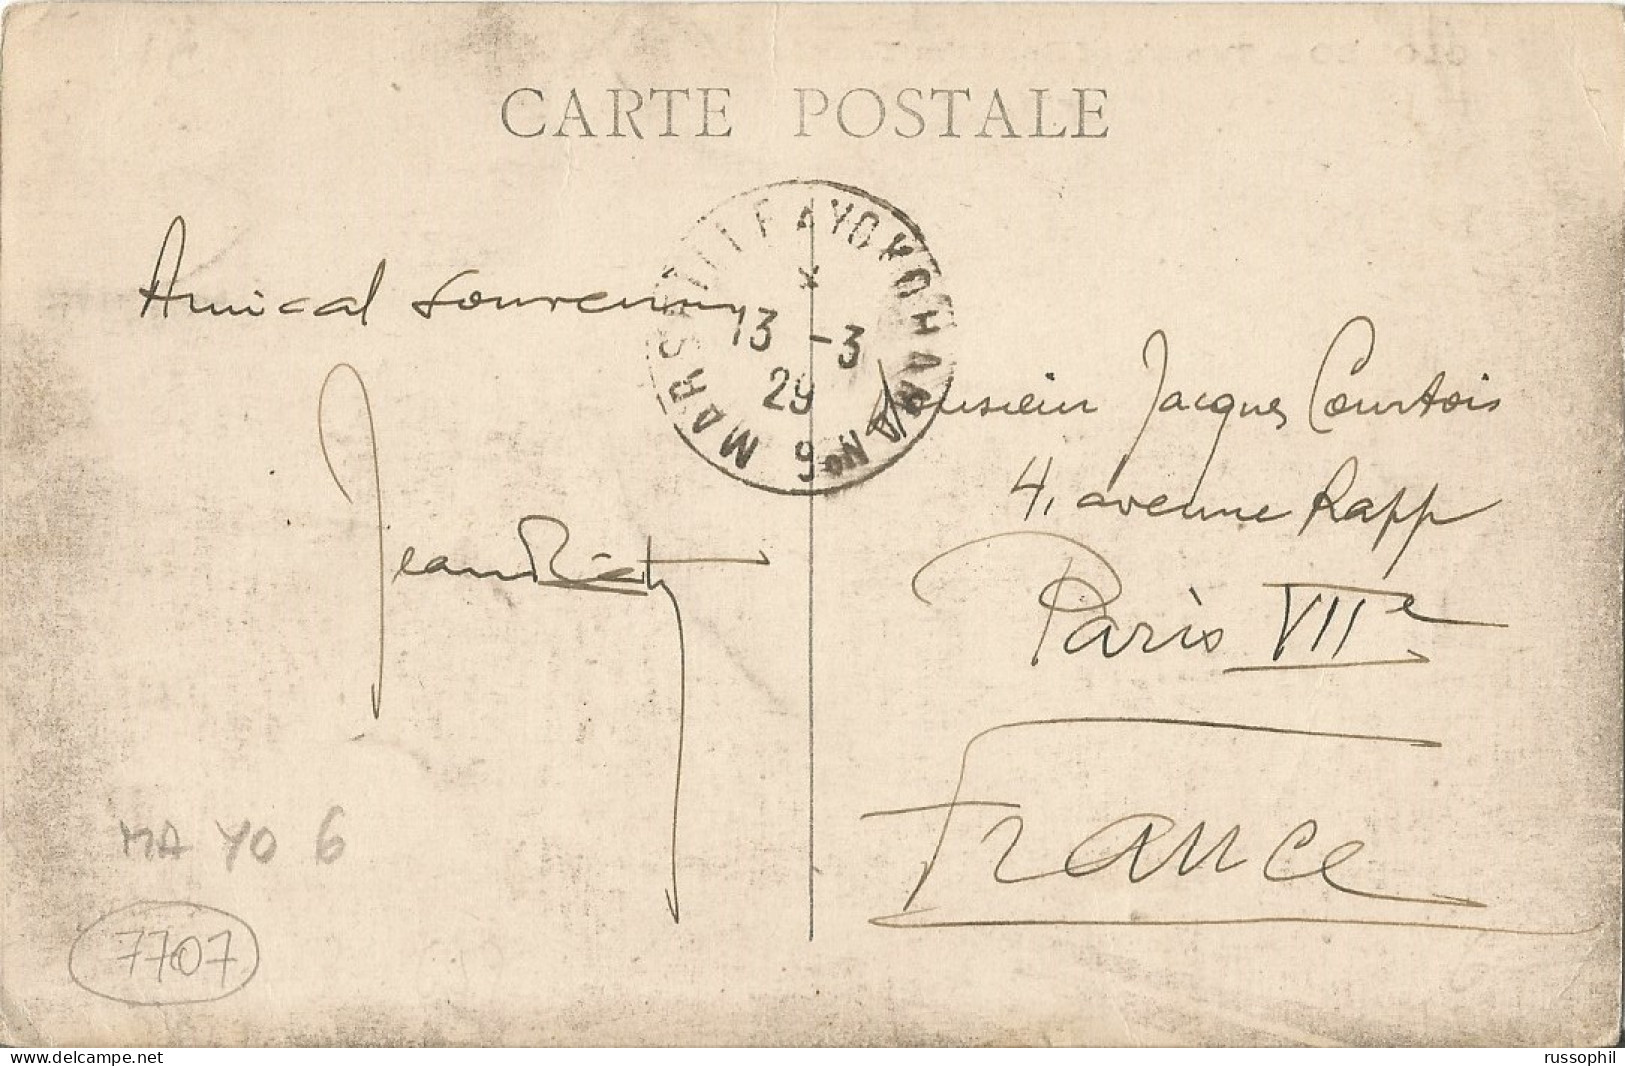 FRANCE - SEA POST - “MARSEILLE TO YOKOHAMA" DEPARTURE CDS ON FRANKED PC (VIEW OF CEYLON / COLOMBO) TO FRANCE - 1929 - Maritime Post